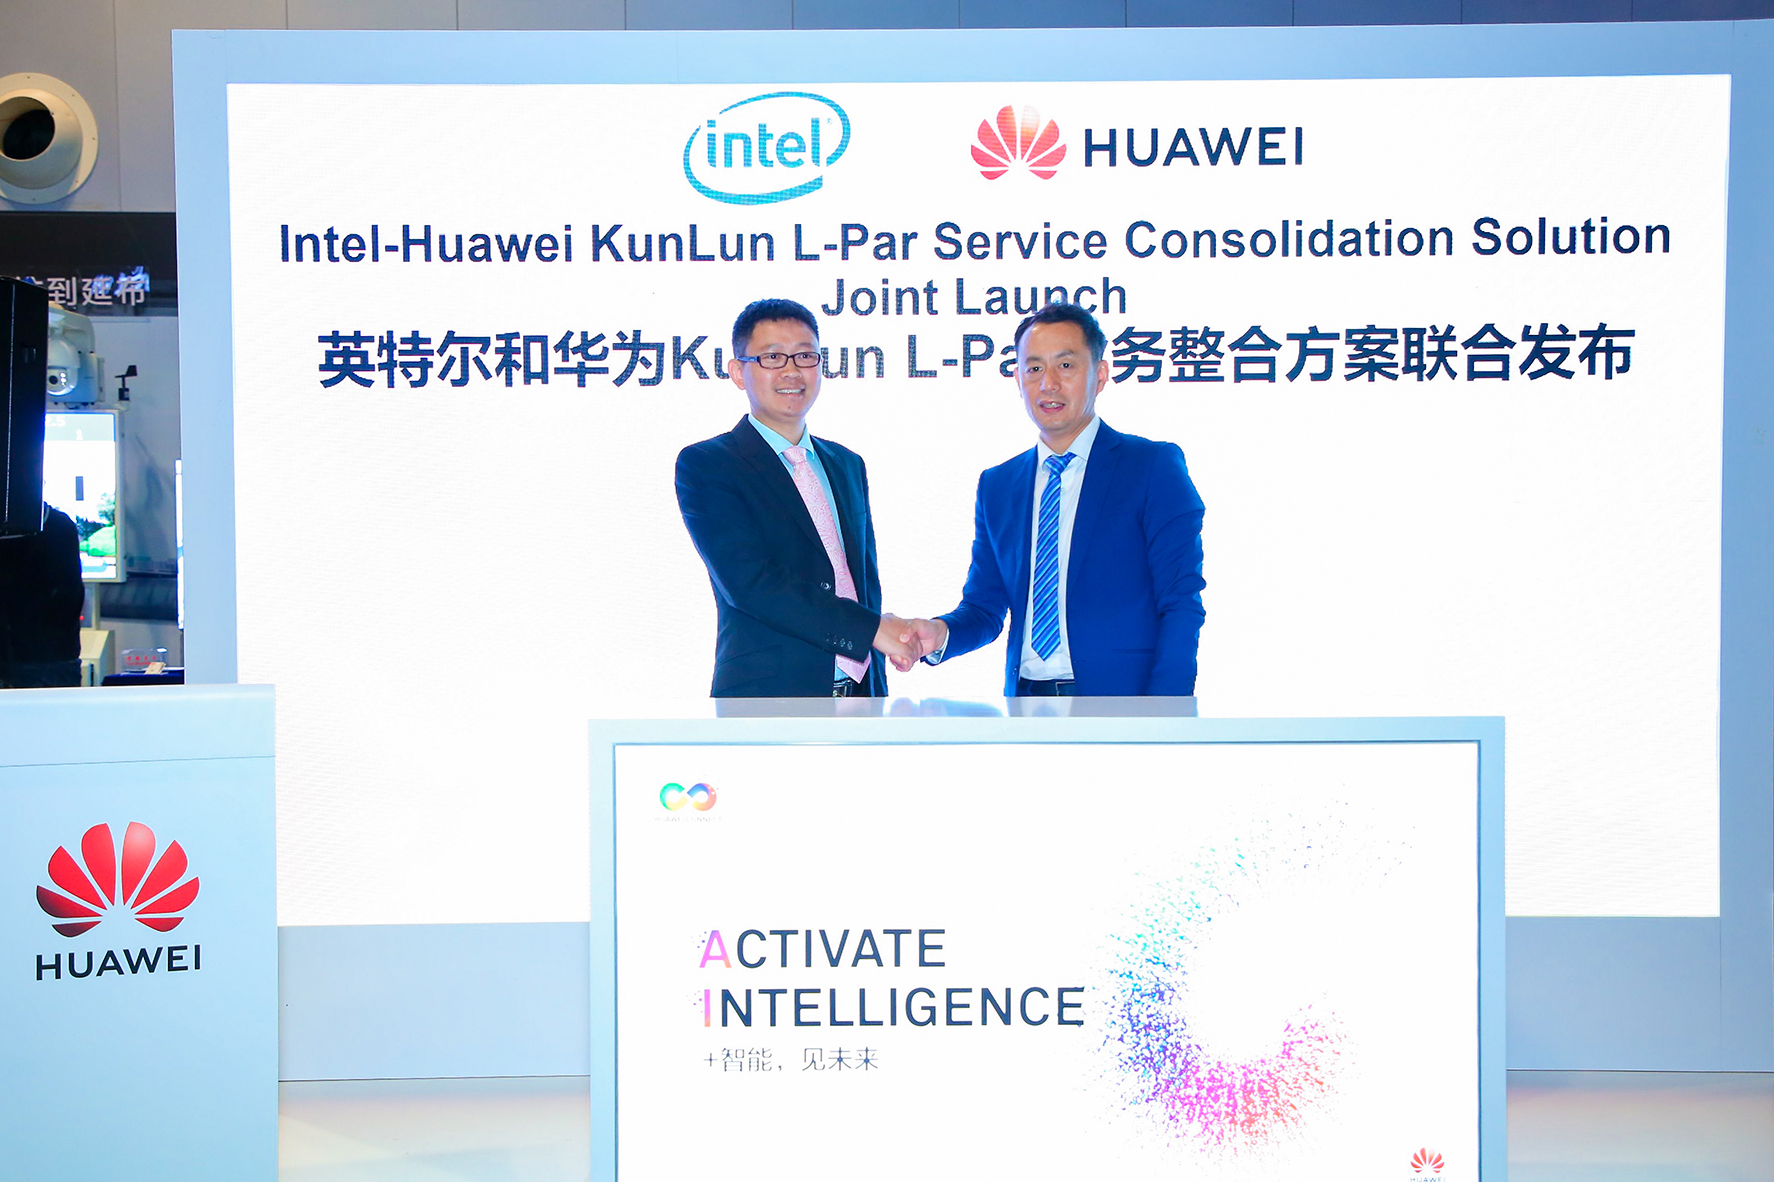 Two executives from Intel and Huawei shake hands during the KunLun L-Par Service Consolidation Solution joint launch